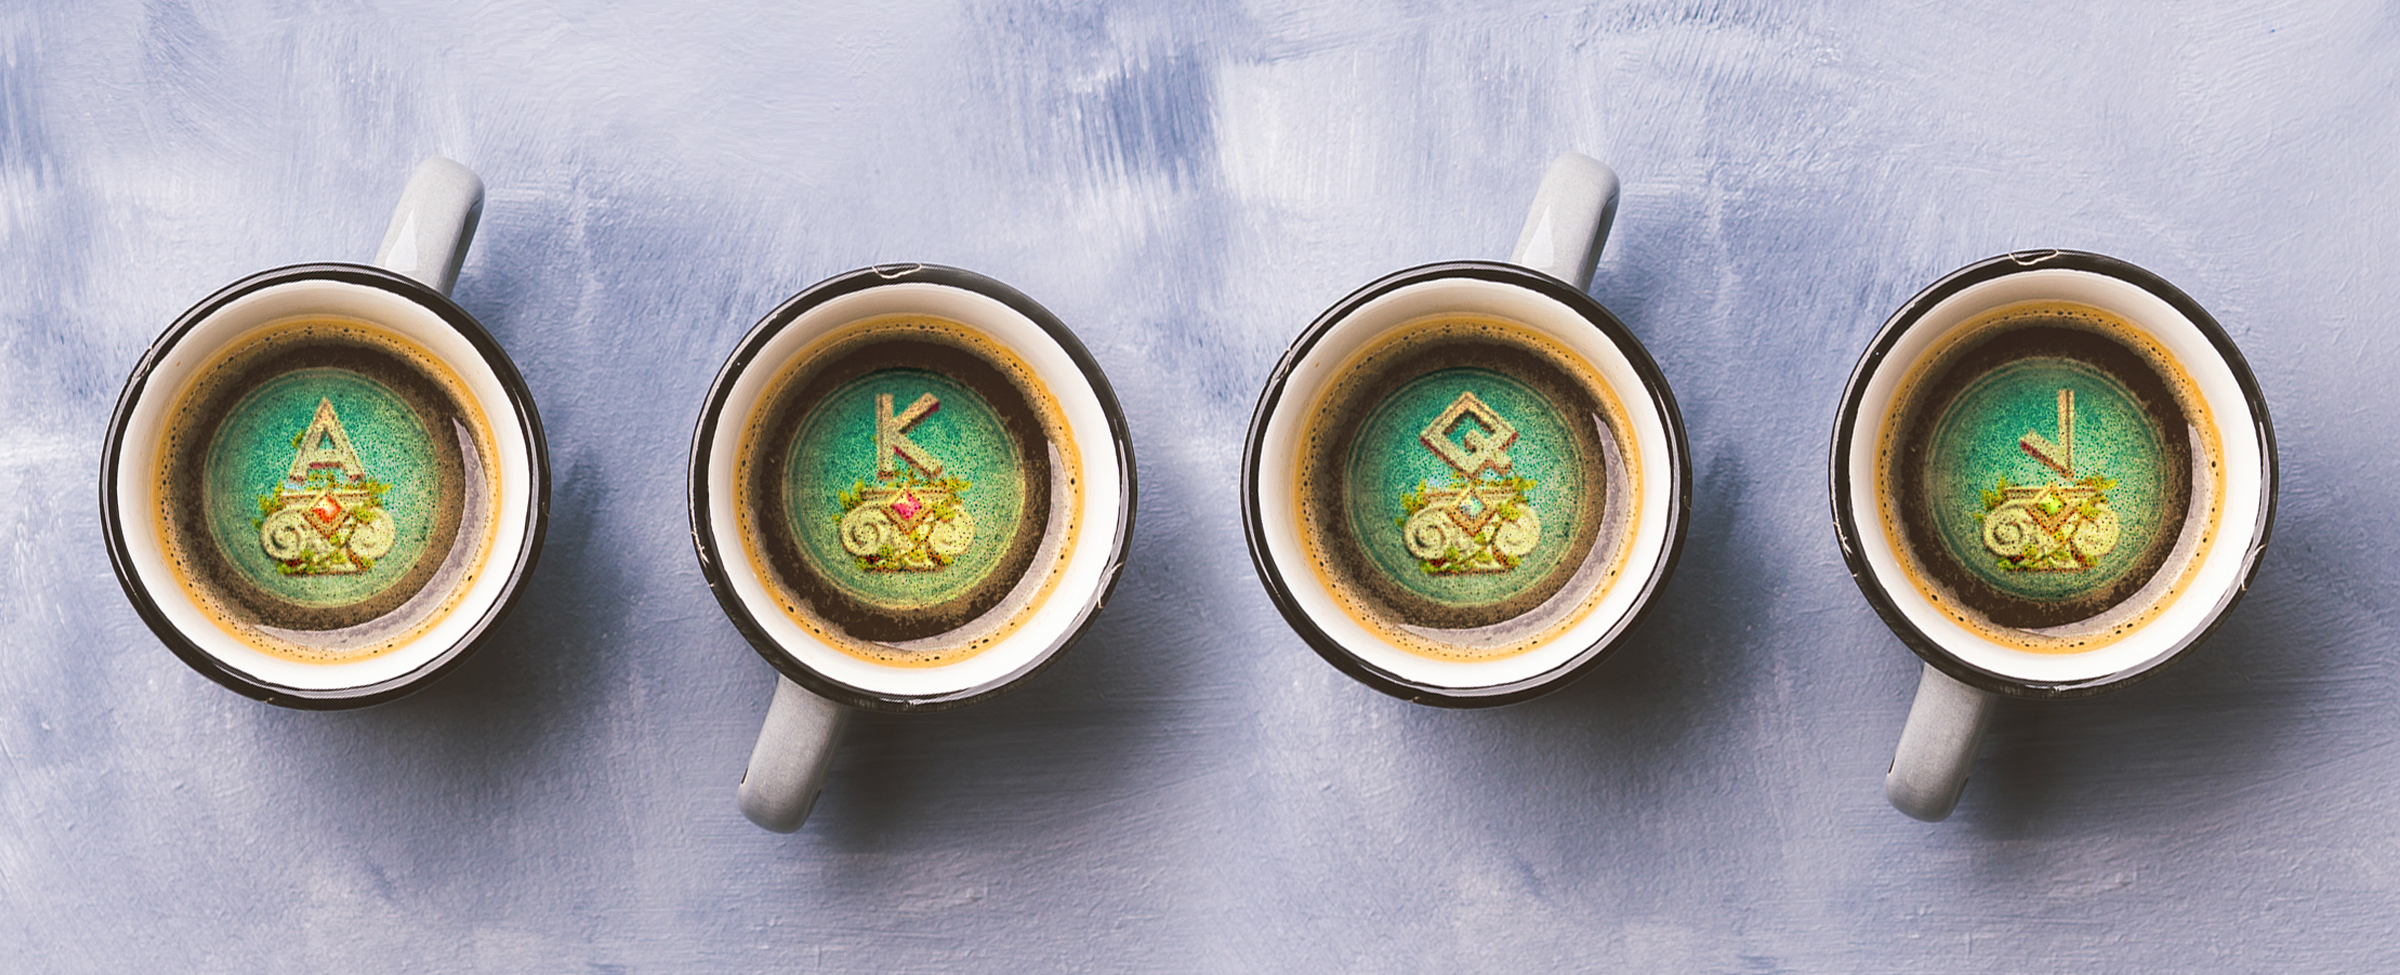 Four coffee mugs sit atop an off-white table surface, each filled with coffee, and each with green sprinkles revealing the slots symbols A, K, Q and V, respectively.